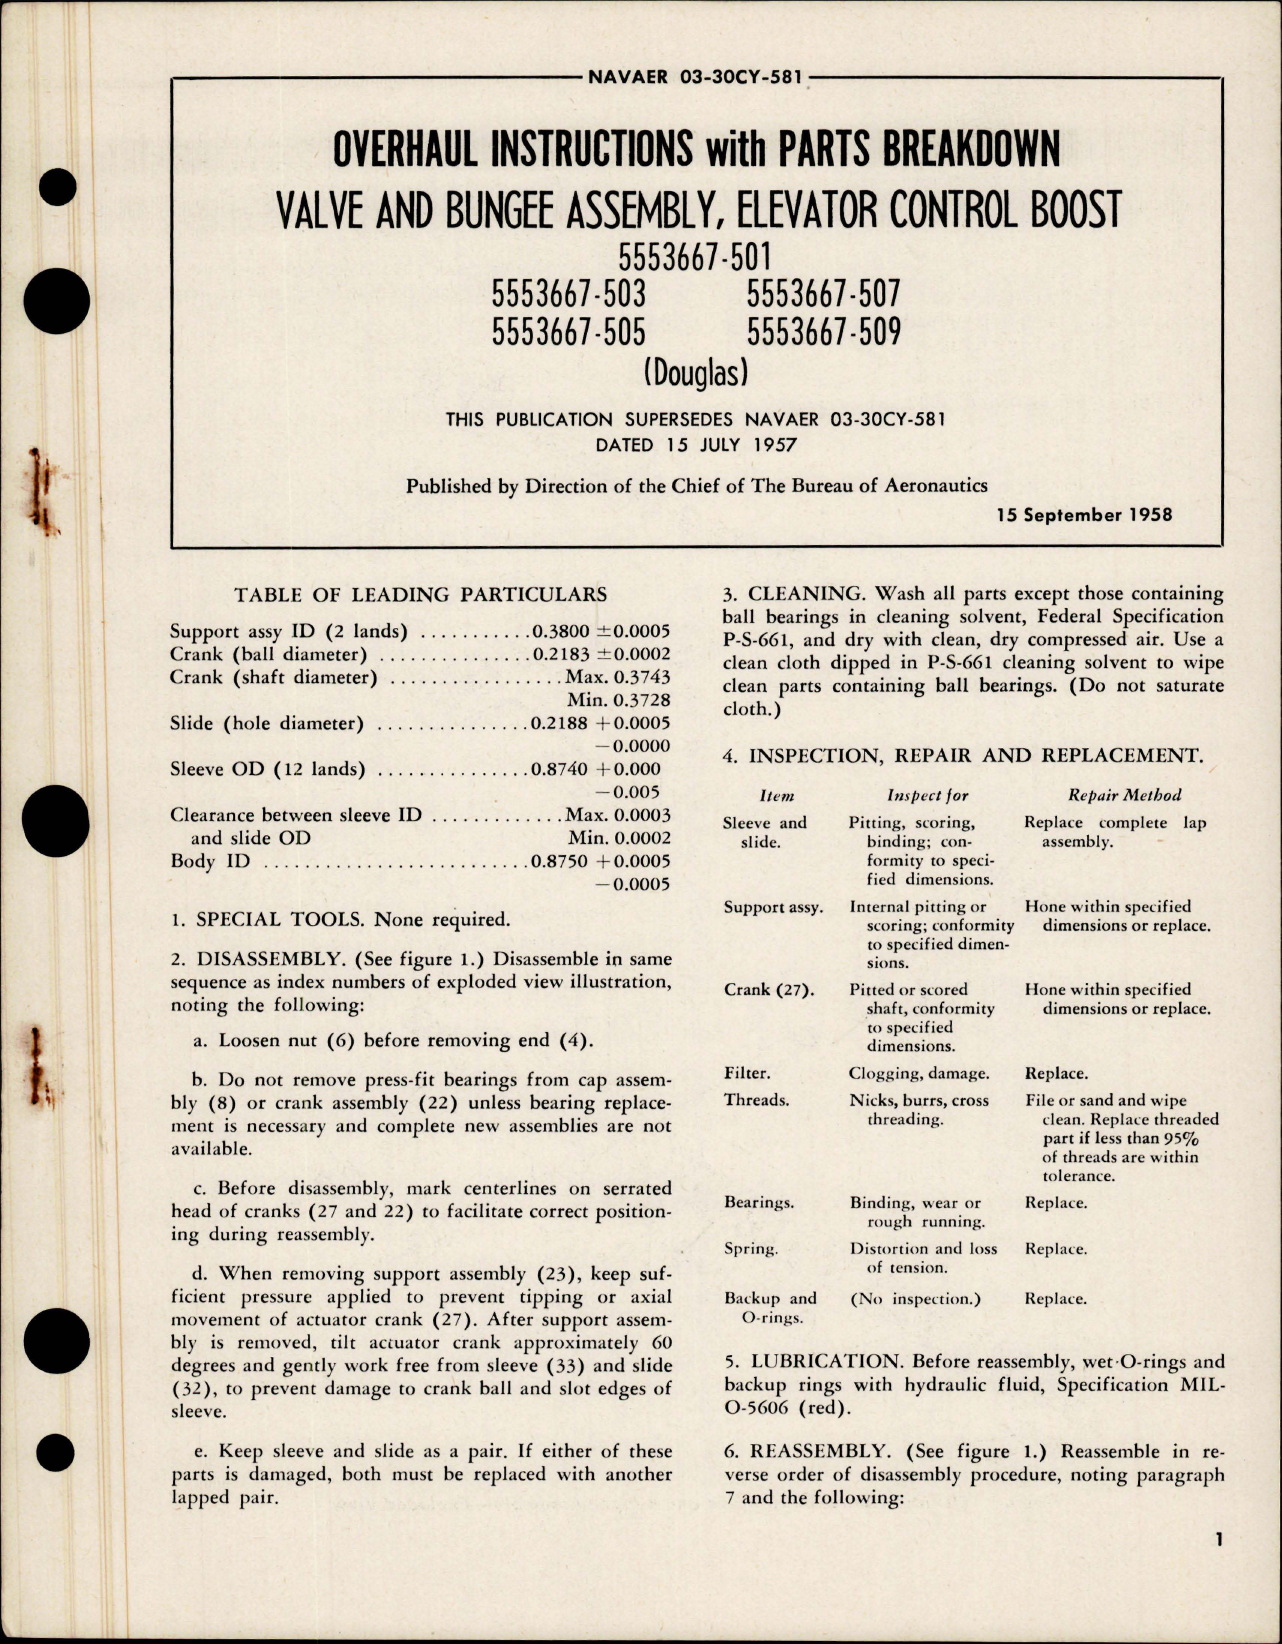 Sample page 1 from AirCorps Library document: Overhaul Instructions with Parts for Elevator Control Boost Valve and Bungee Assembly 